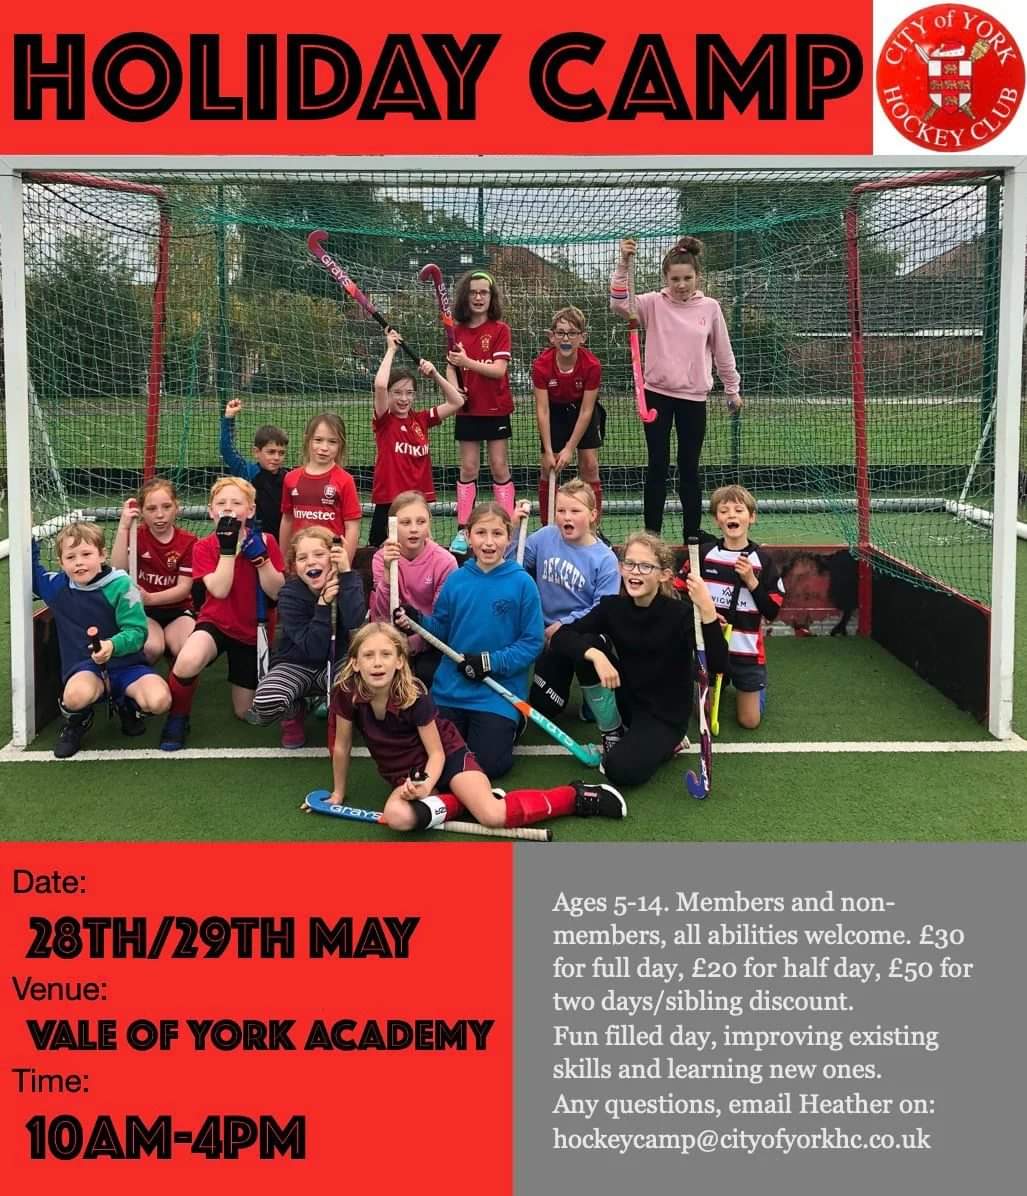 Holiday Camps at City of York HC are back! To book your place fill in the form: forms.gle/2M5QL5jZqrdV2i…
#redandblackarmy #hockeyfamily ❤️🖤❤️🖤🏑